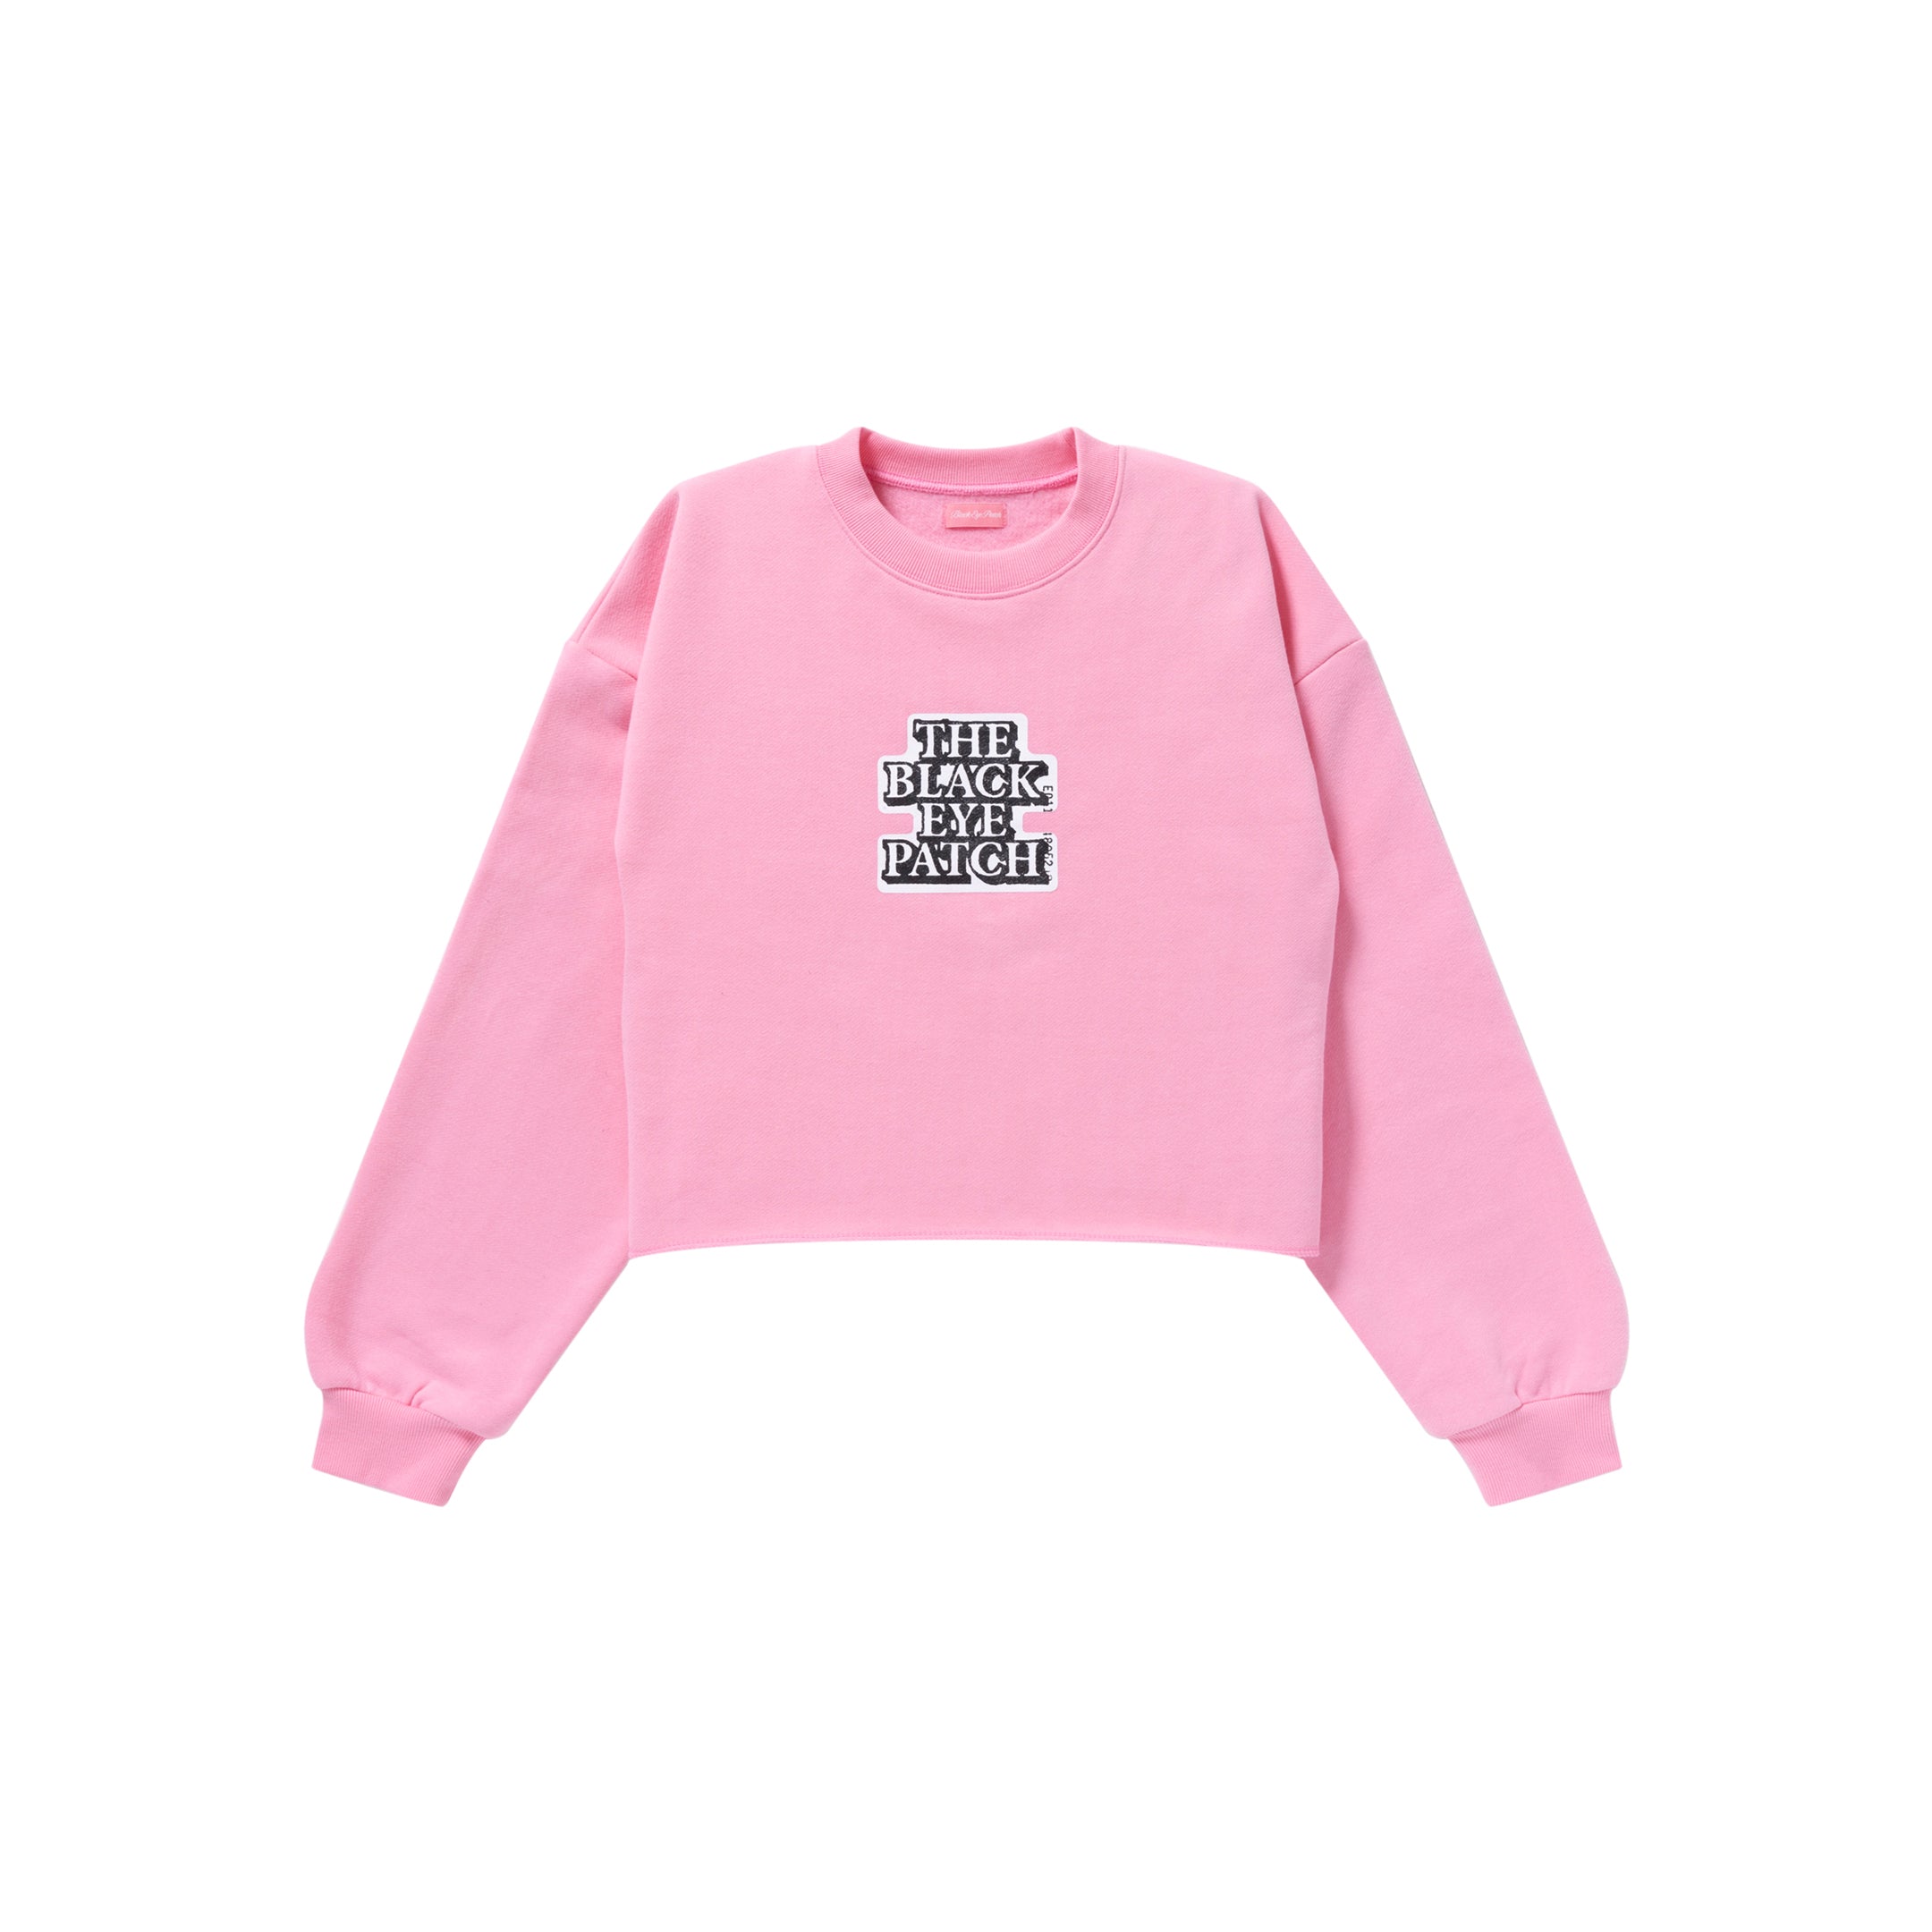 OG LABEL CROPPED CREW SWEAT PINK – BlackEyePatch